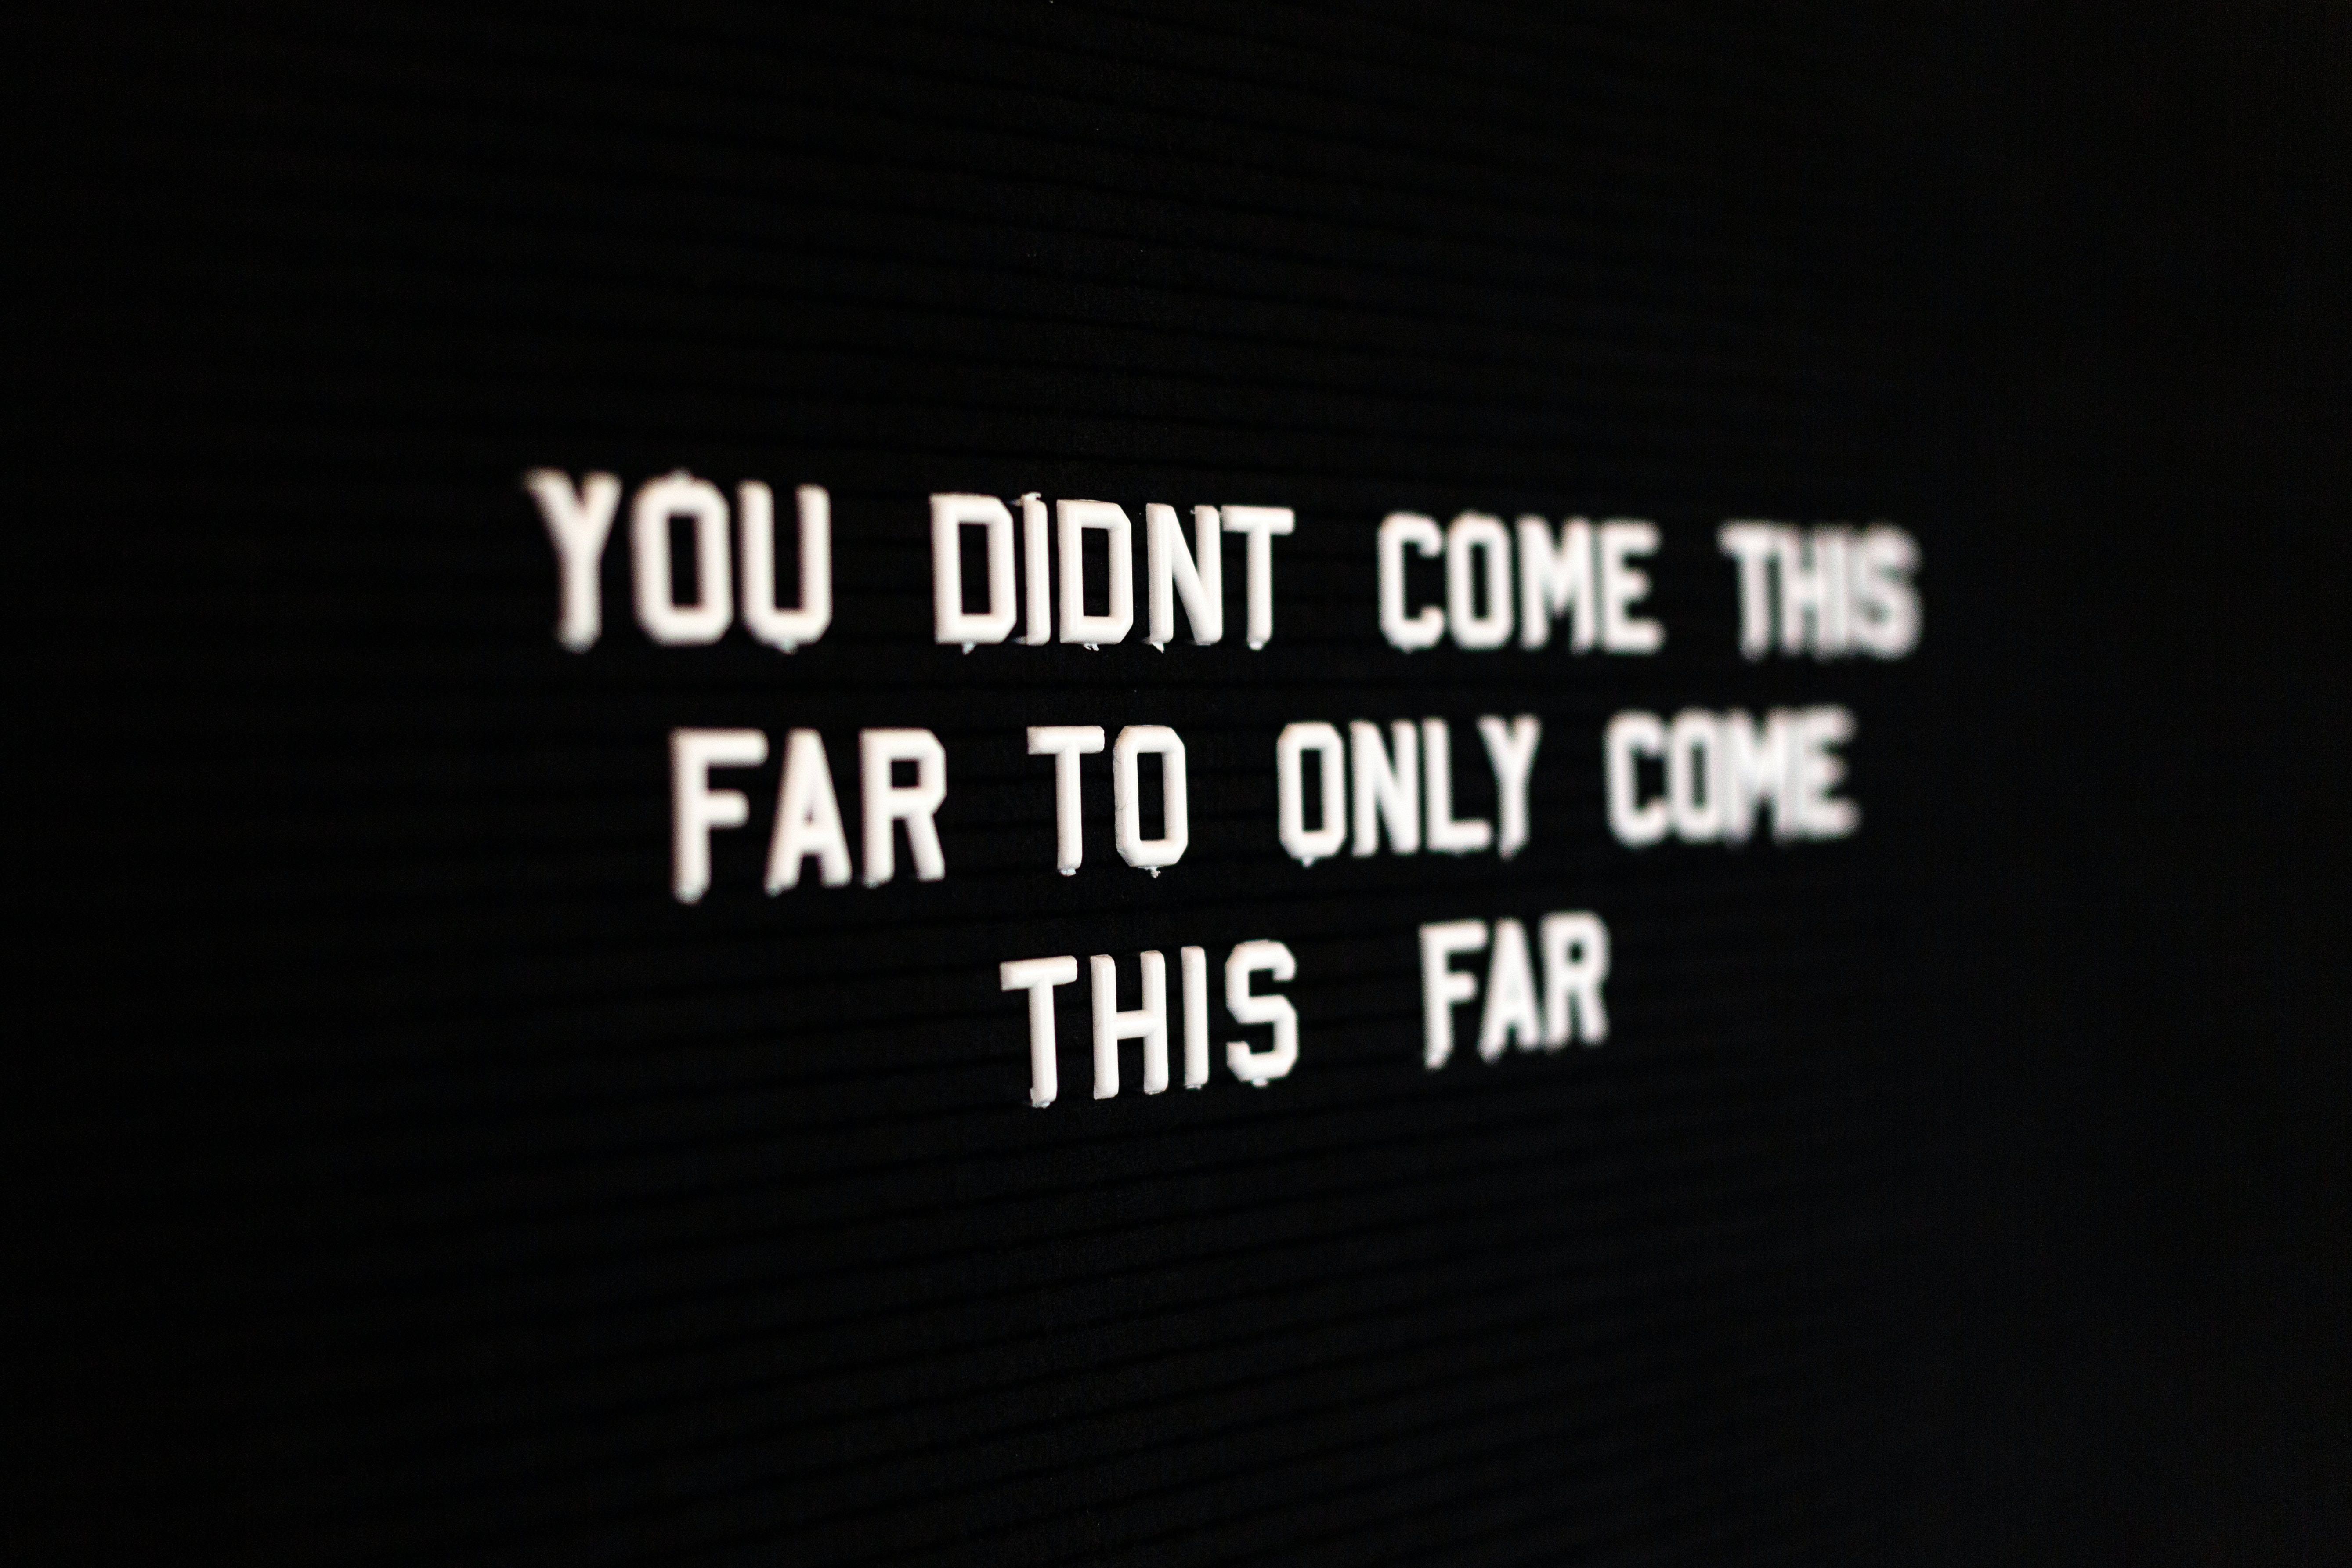 Quote saying &quot;You didn&#039;t come this far to only come this far&quot;